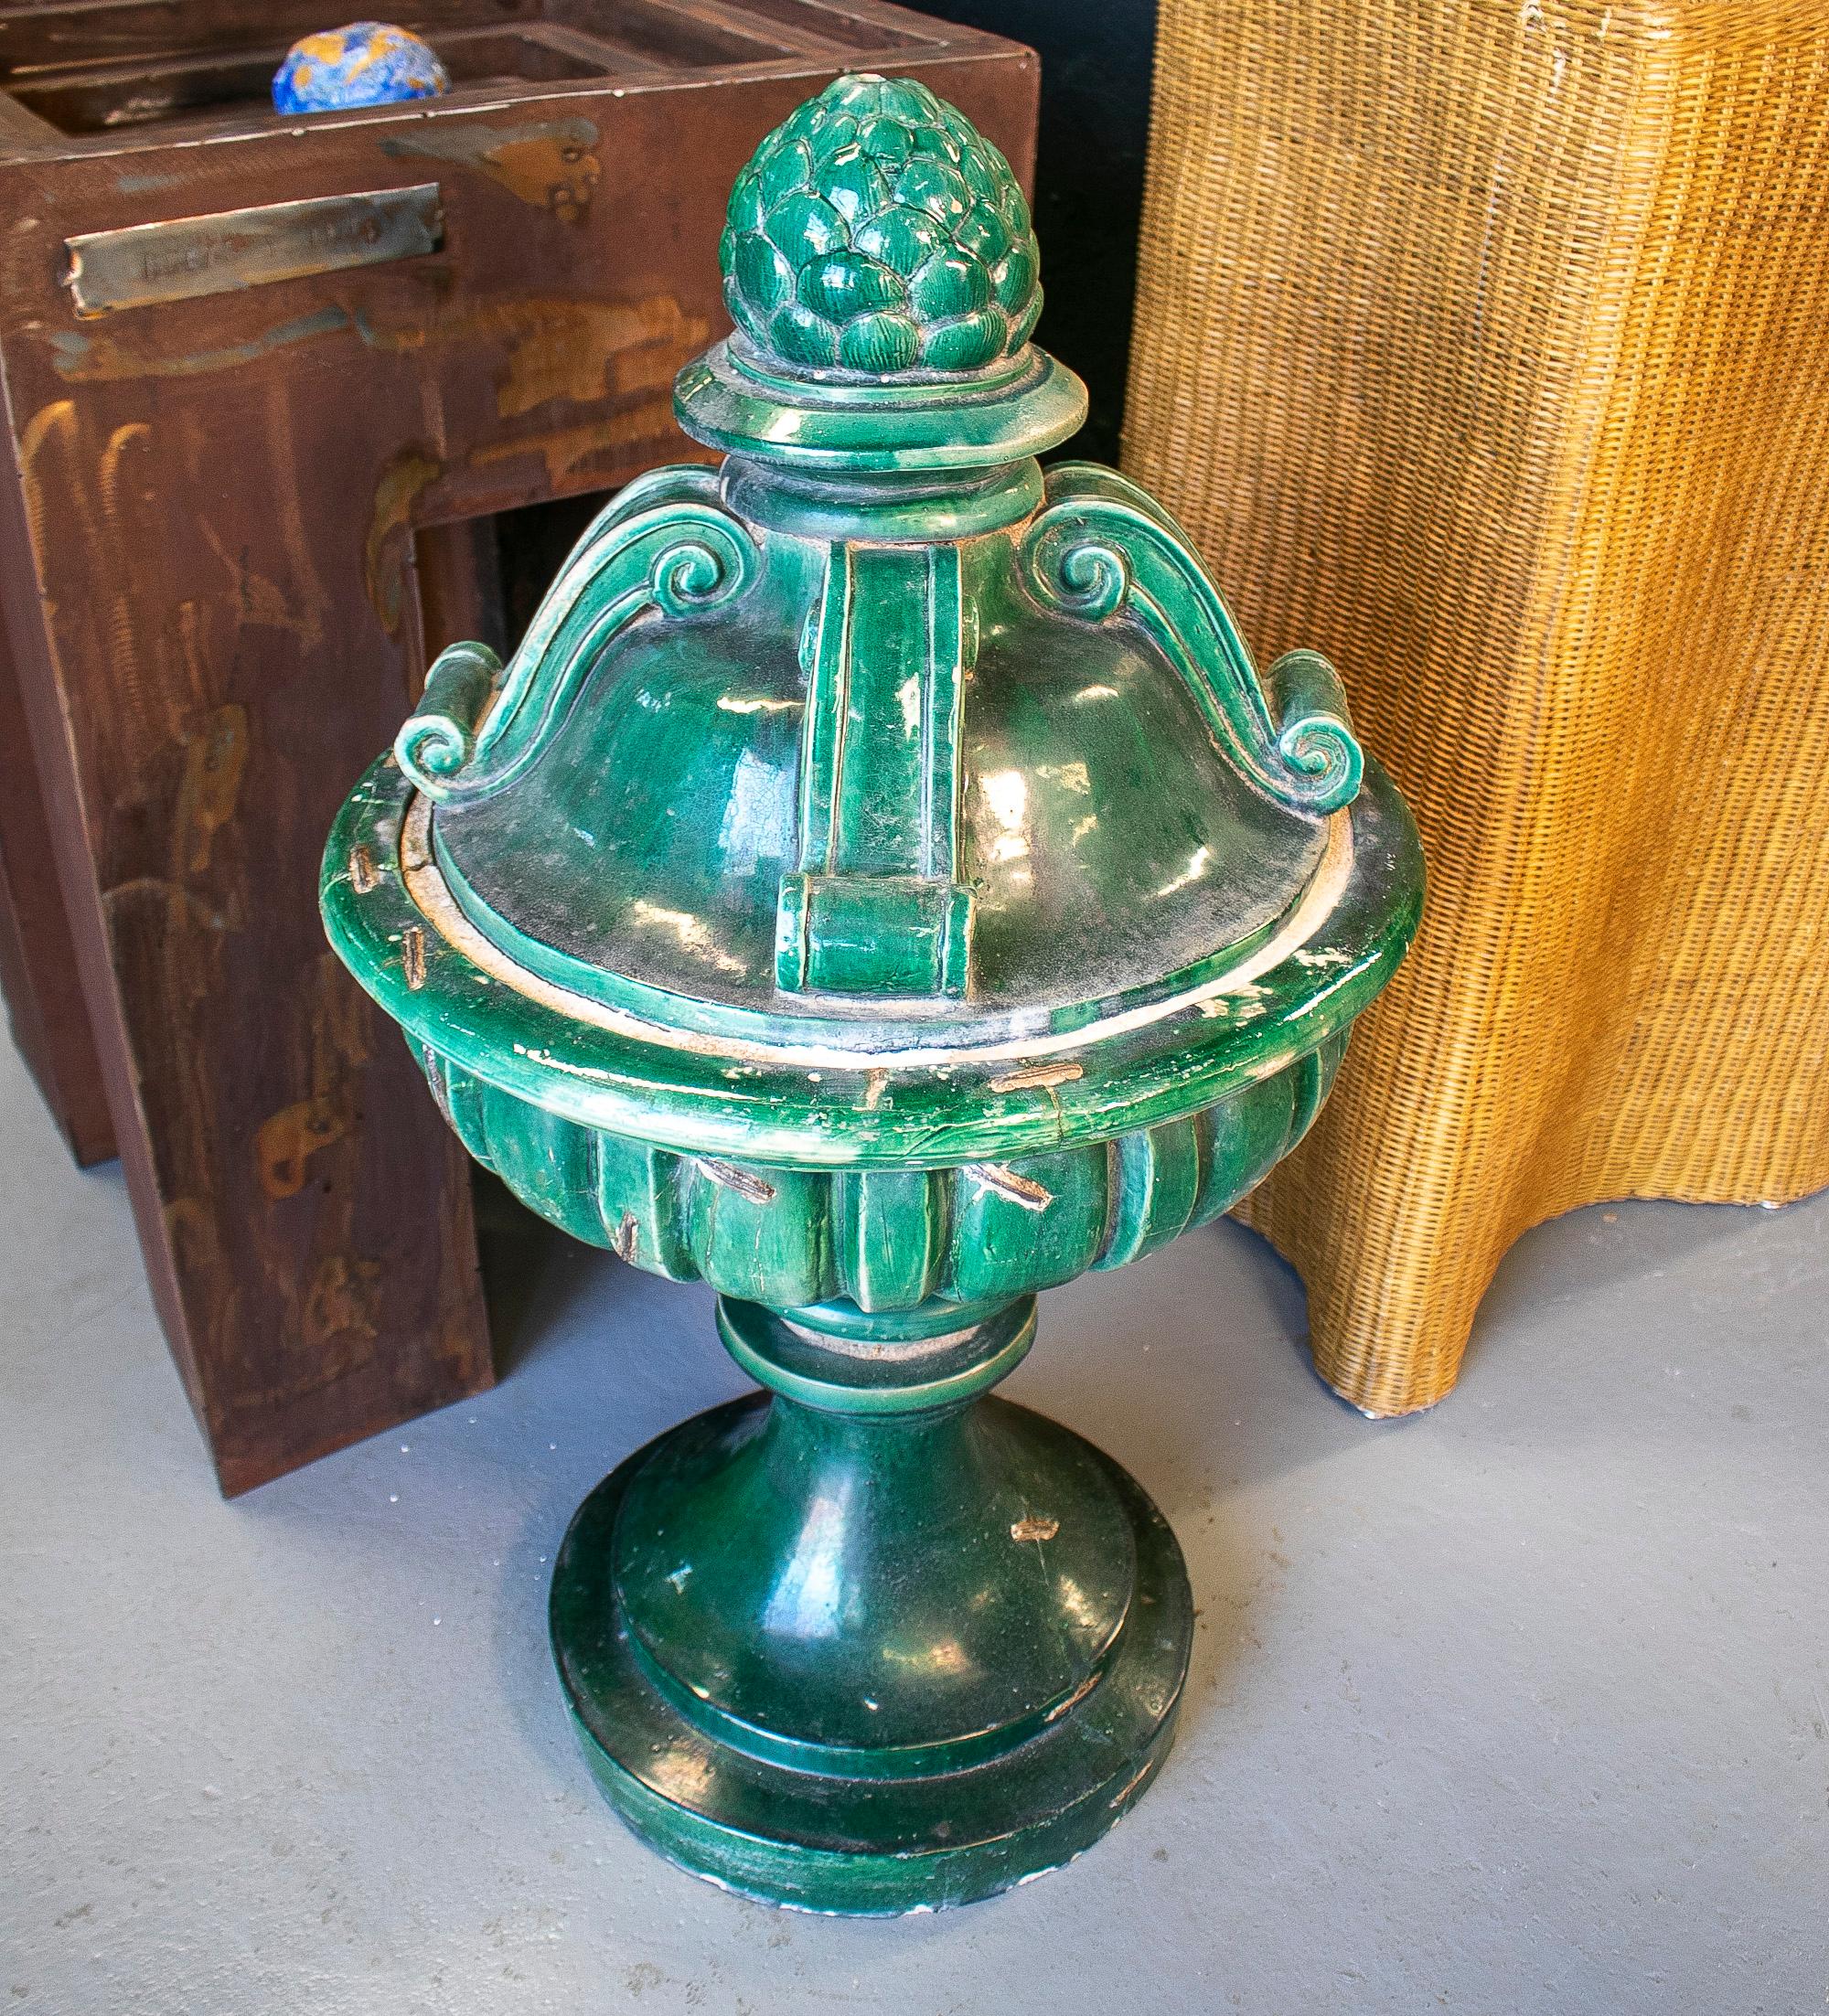 19th century Spanish classical green glazed terracotta finial repaired with iron staples.